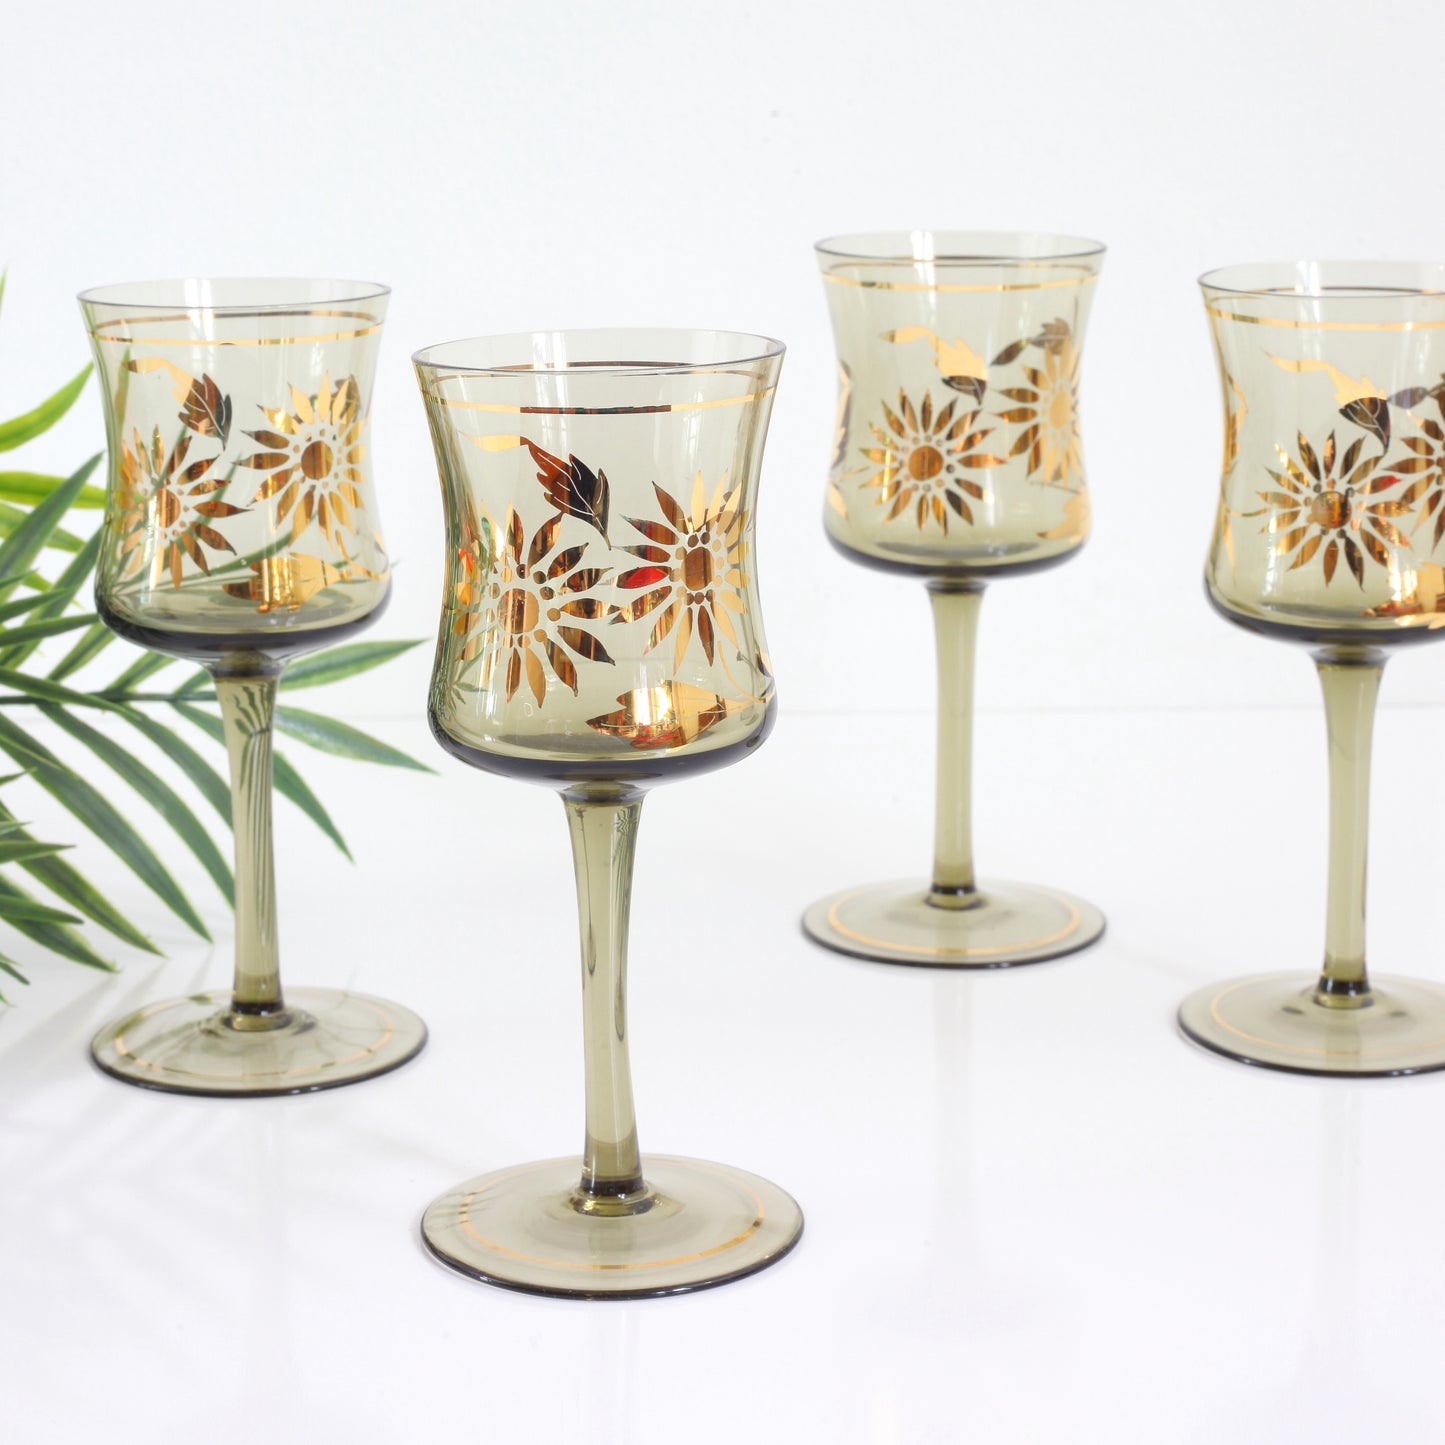 SOLD - Vintage Smoky Amber & Gold Romanian Sunflower Wine Glasses